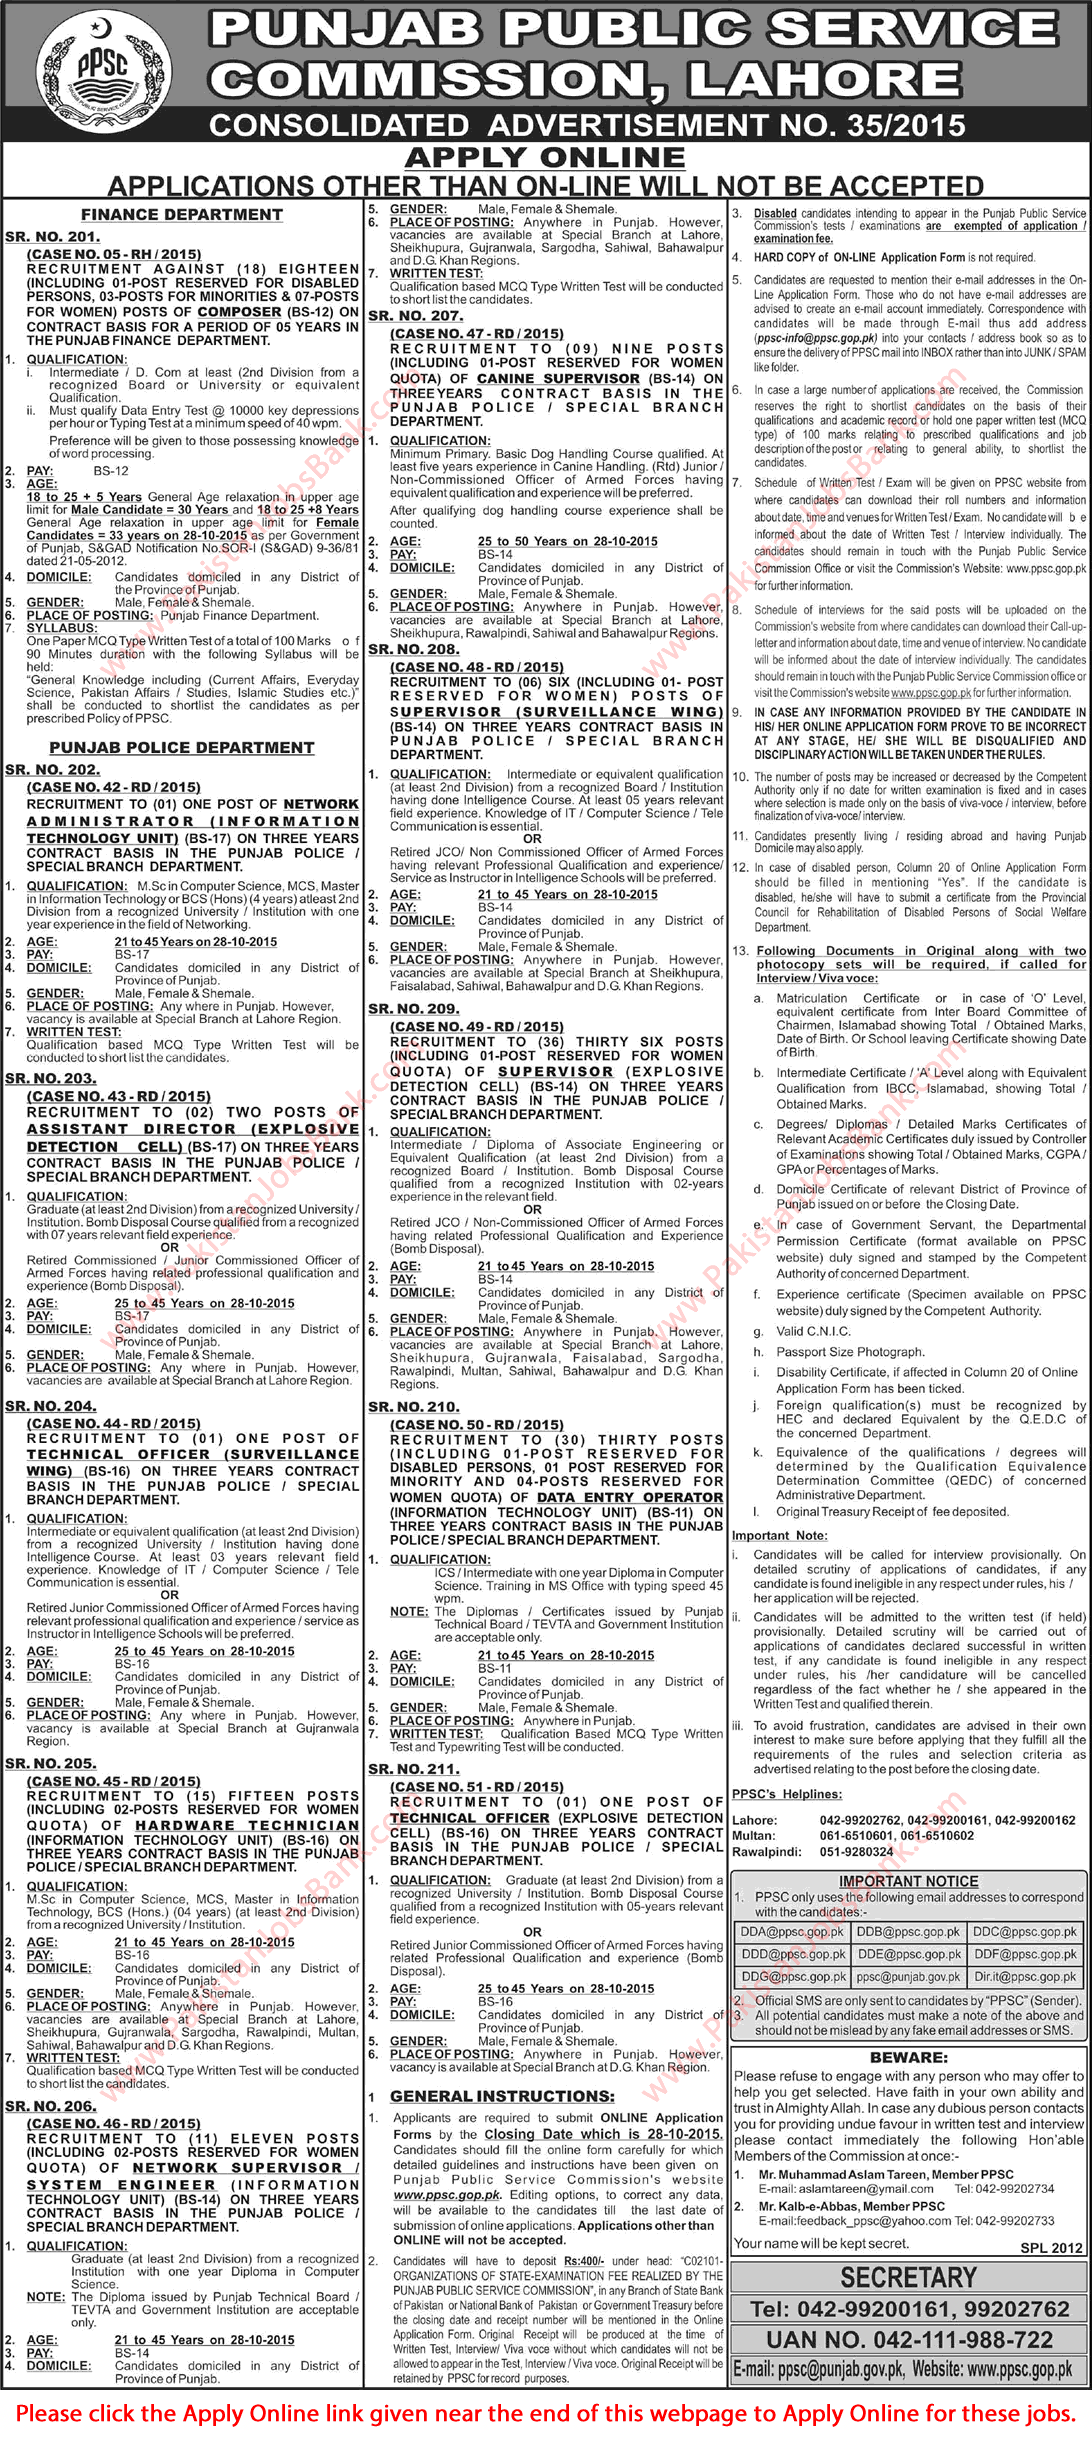 PPSC Jobs October 2015 Consolidated Advertisement No. 35/2015 Apply Online Latest